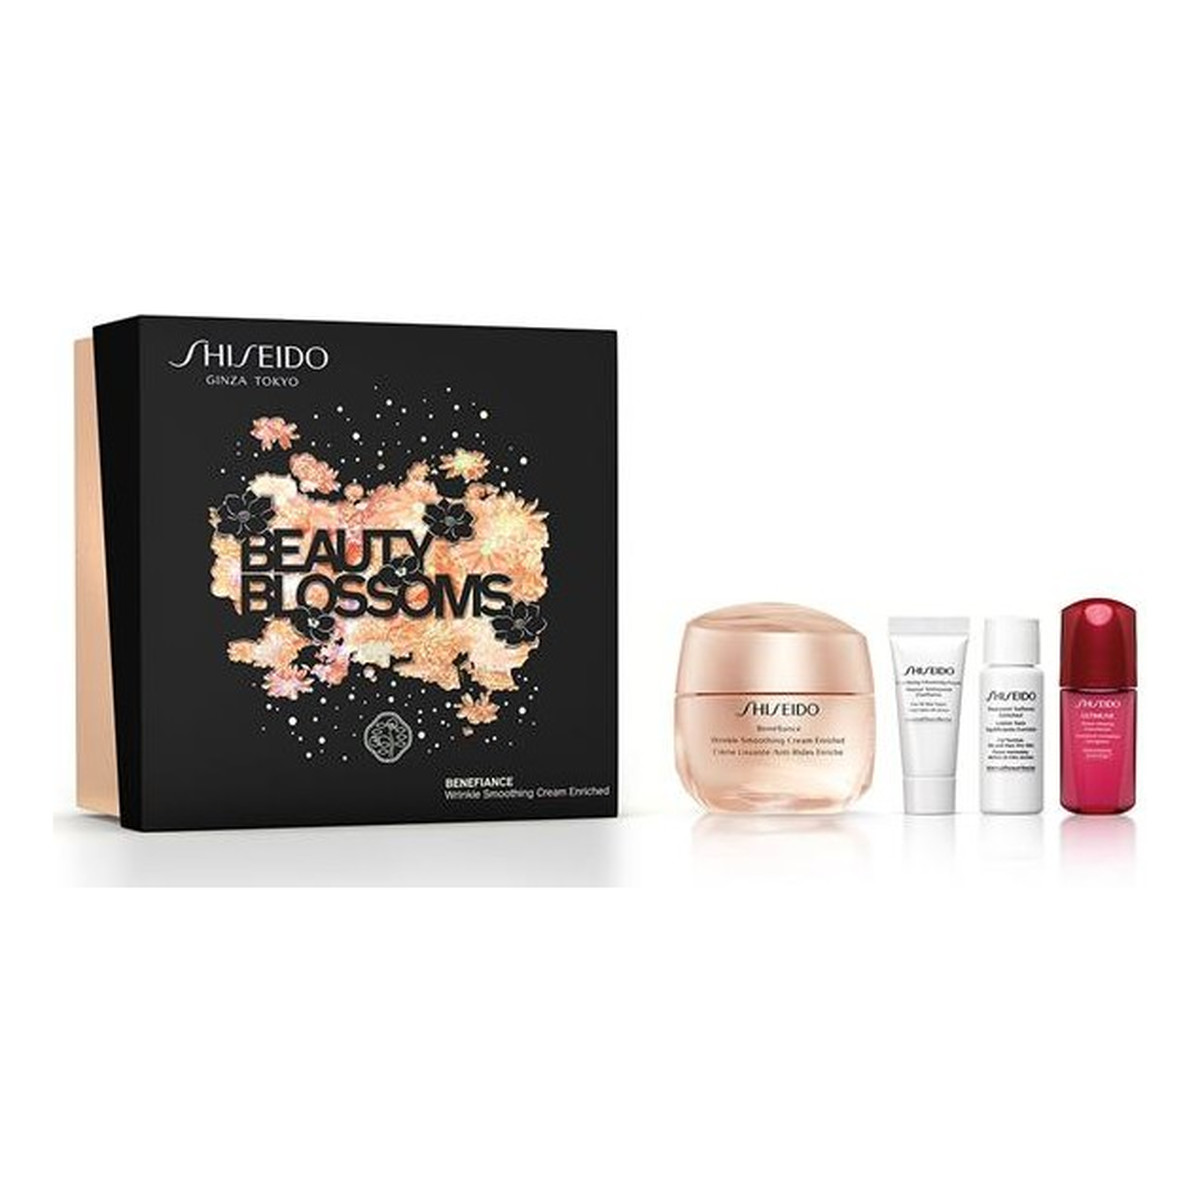 Shiseido Beauty Blossoms Zestaw benefiance wrinkle smoothing enriched cream 50ml + power infusing 10ml + treatment softener enriched 7ml + clarifying cleansing foam 5ml